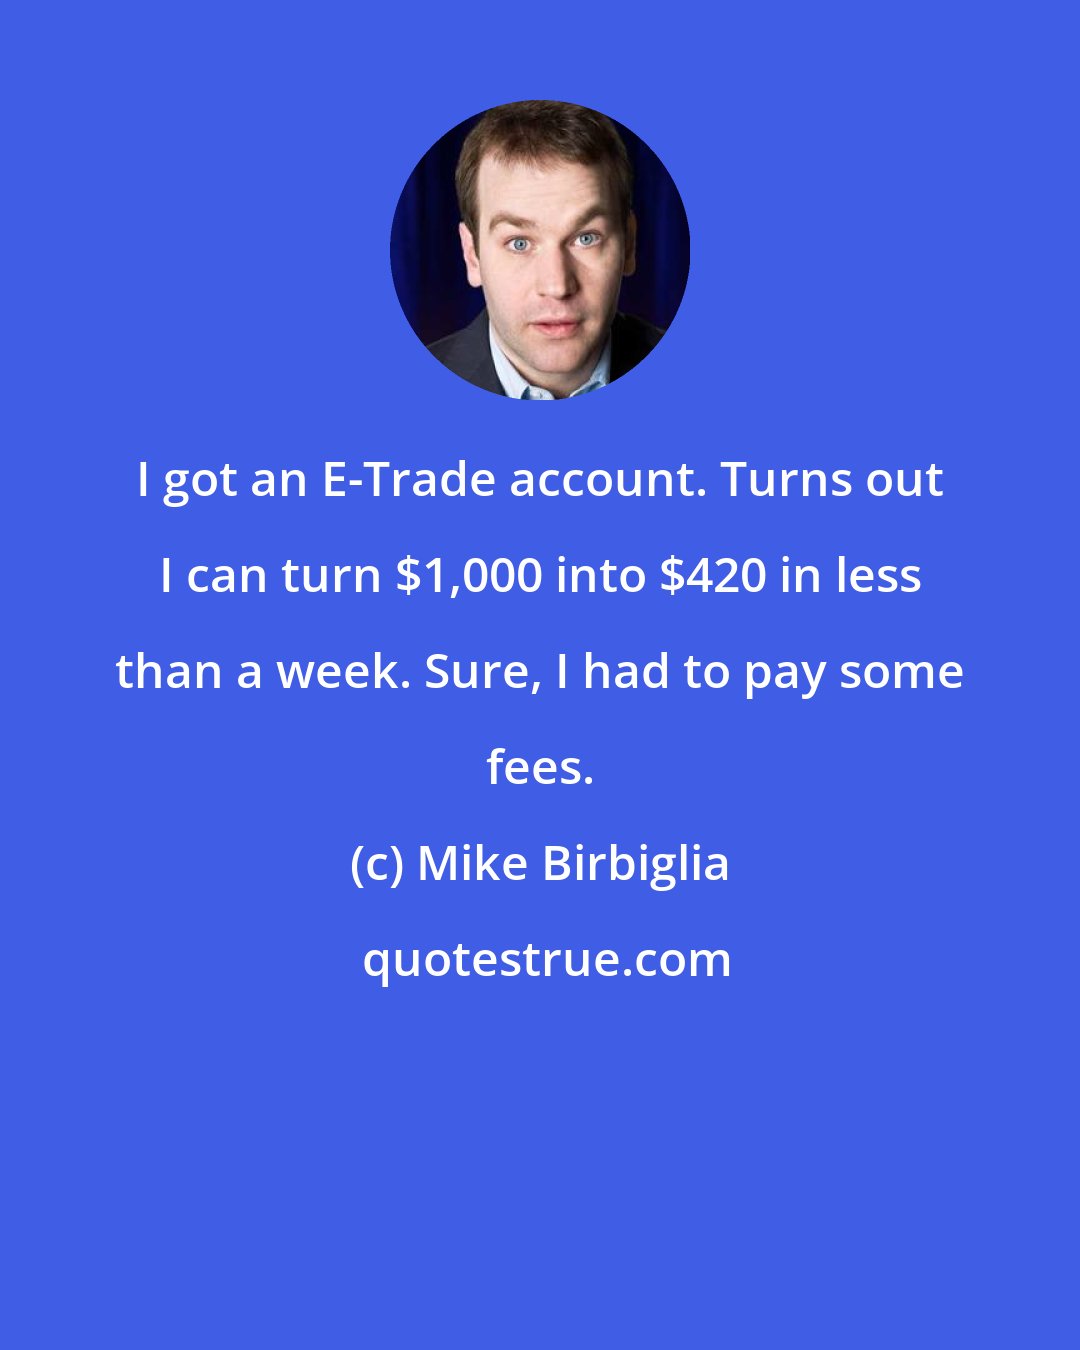 Mike Birbiglia: I got an E-Trade account. Turns out I can turn $1,000 into $420 in less than a week. Sure, I had to pay some fees.